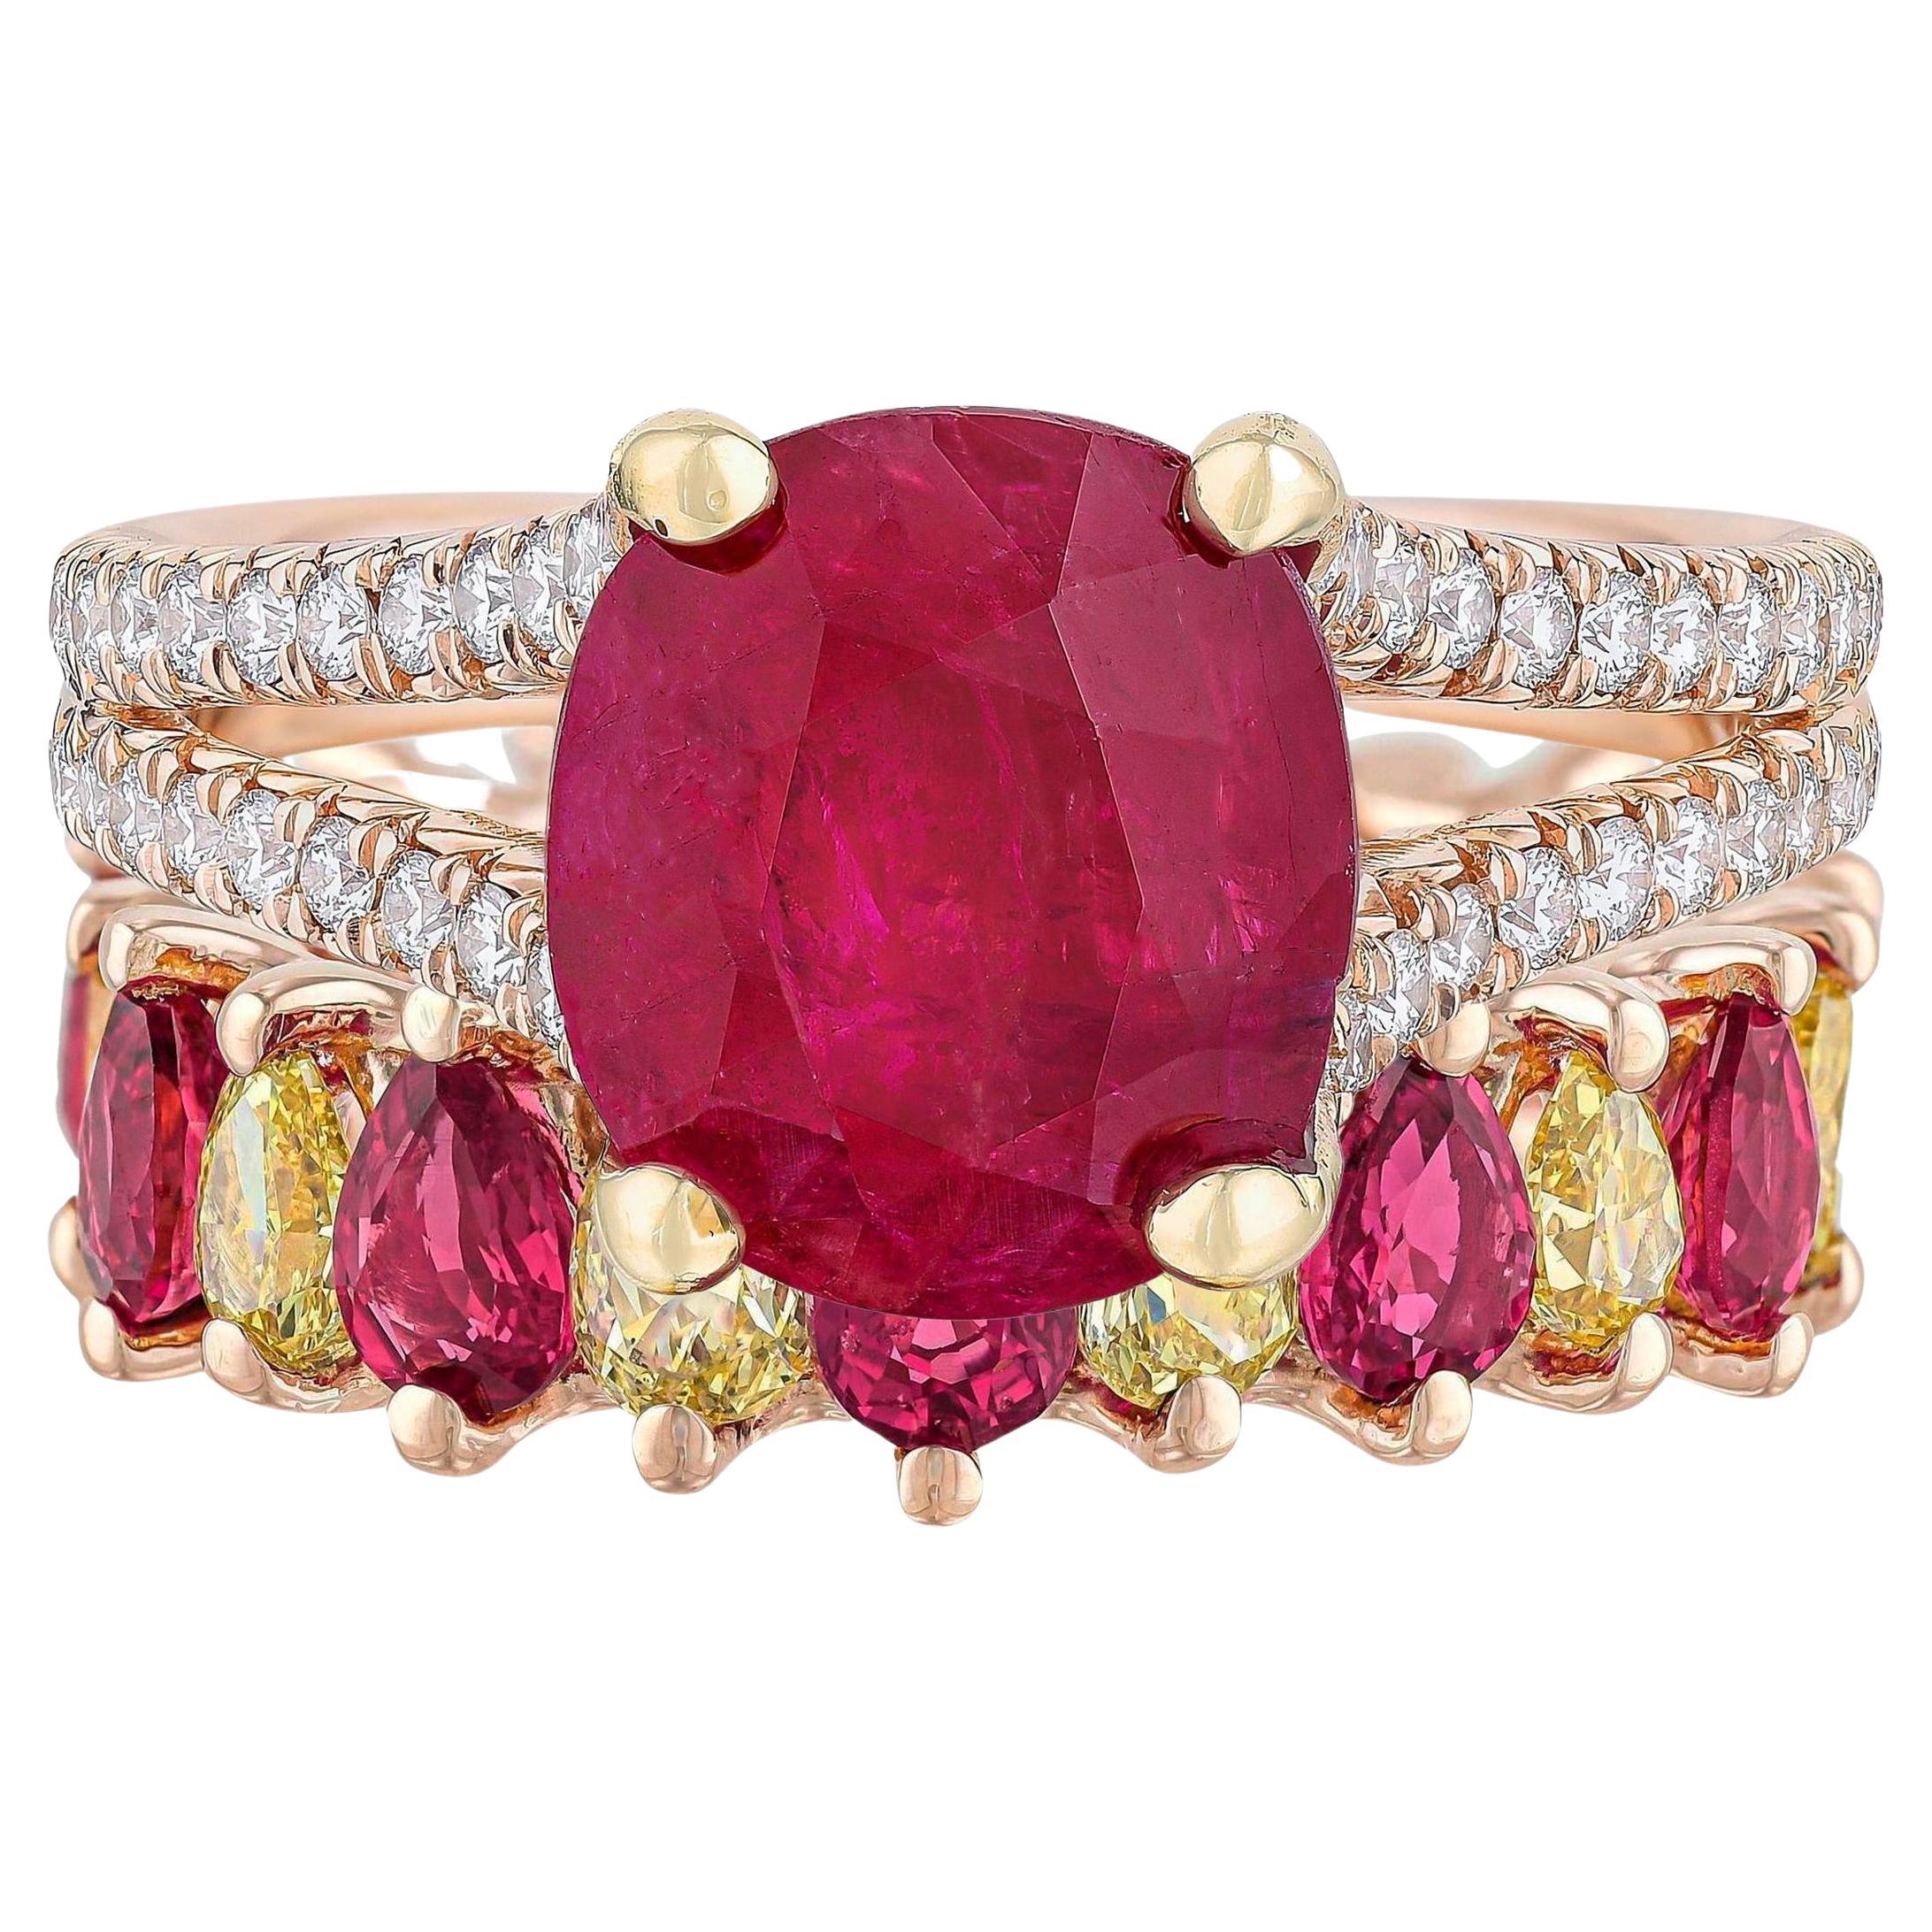 It comes with the Original GIA Certificate #5222345788
All Gemstones are Natural
The set consists from two rings

Main Ring Details:
Natural Ruby from Burma
No Treatments, No Heat, Natural
Carat Weight: 3.68 Carat
Measurements: 9.52 x 8.39  x 4.68